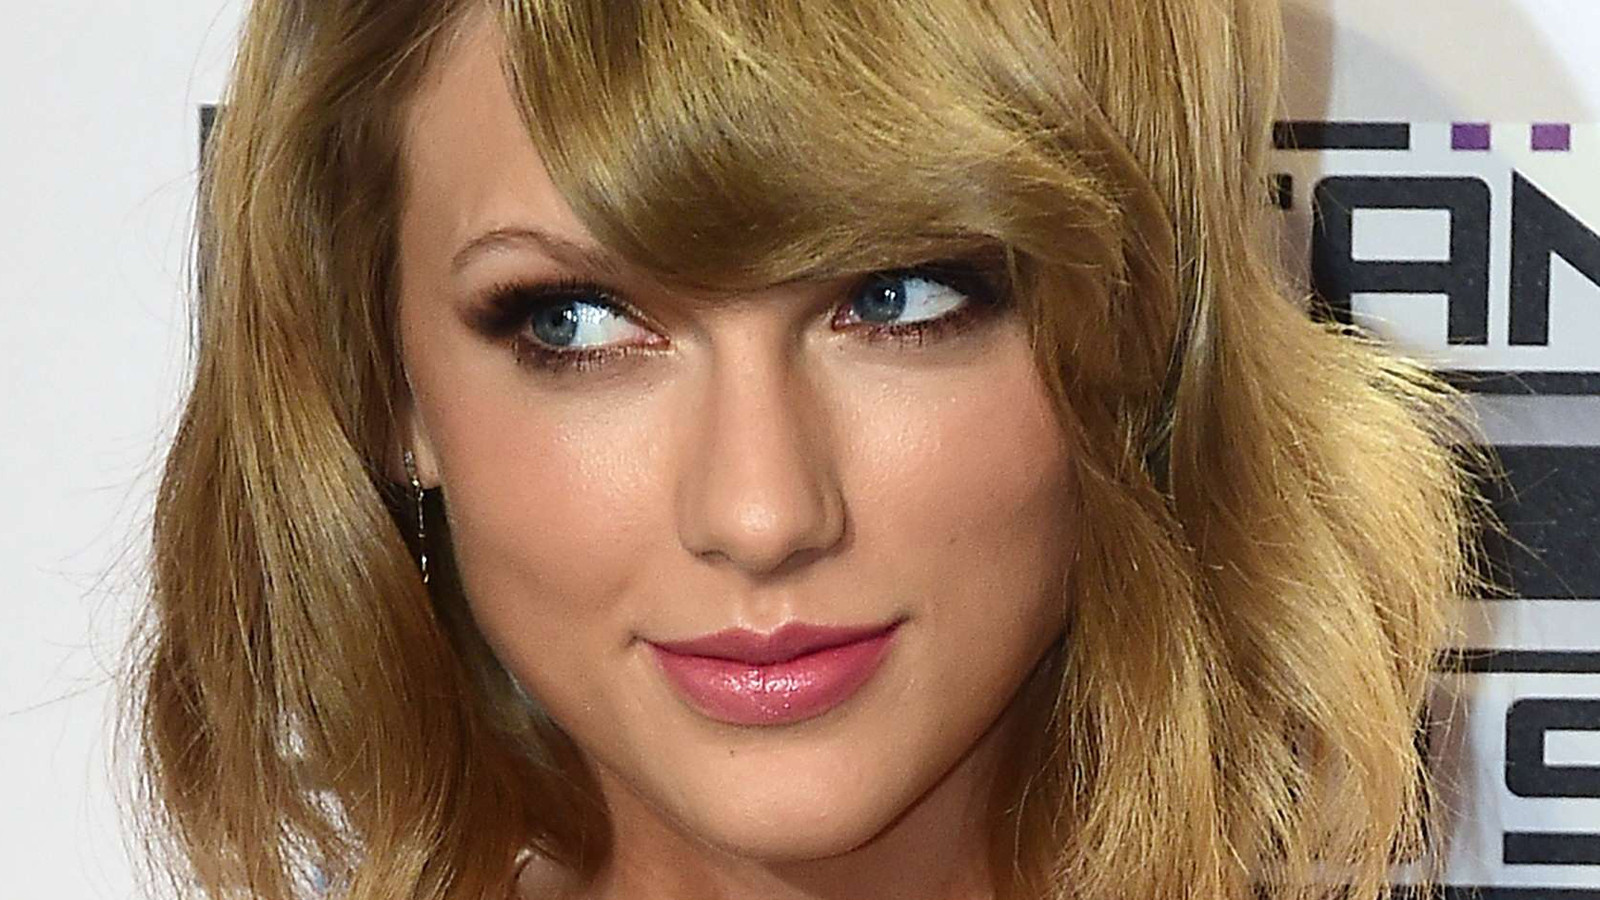 Photos swift taylor nude of Taylor Swift